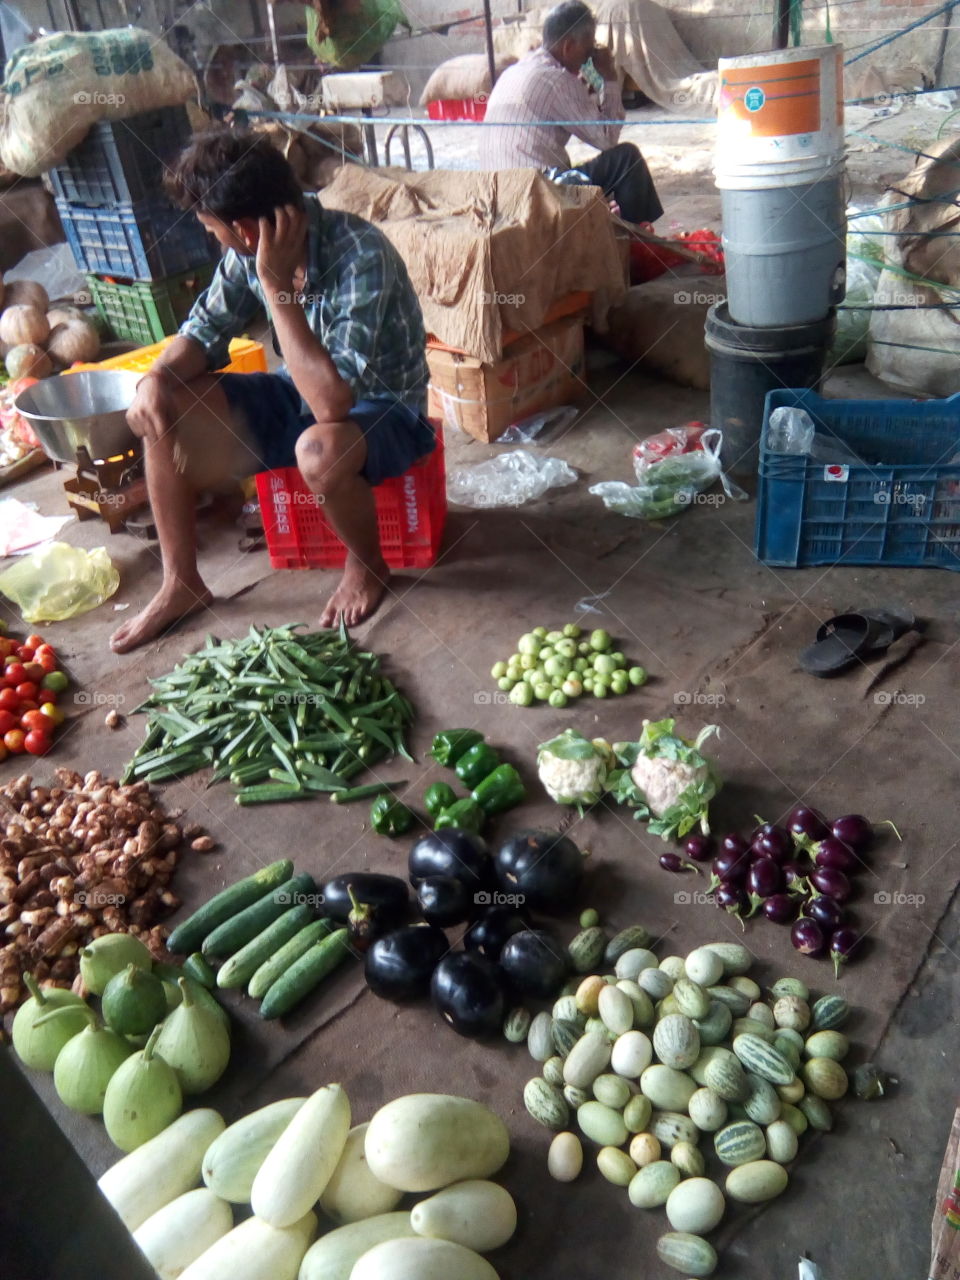 people in small business- a vegetable market